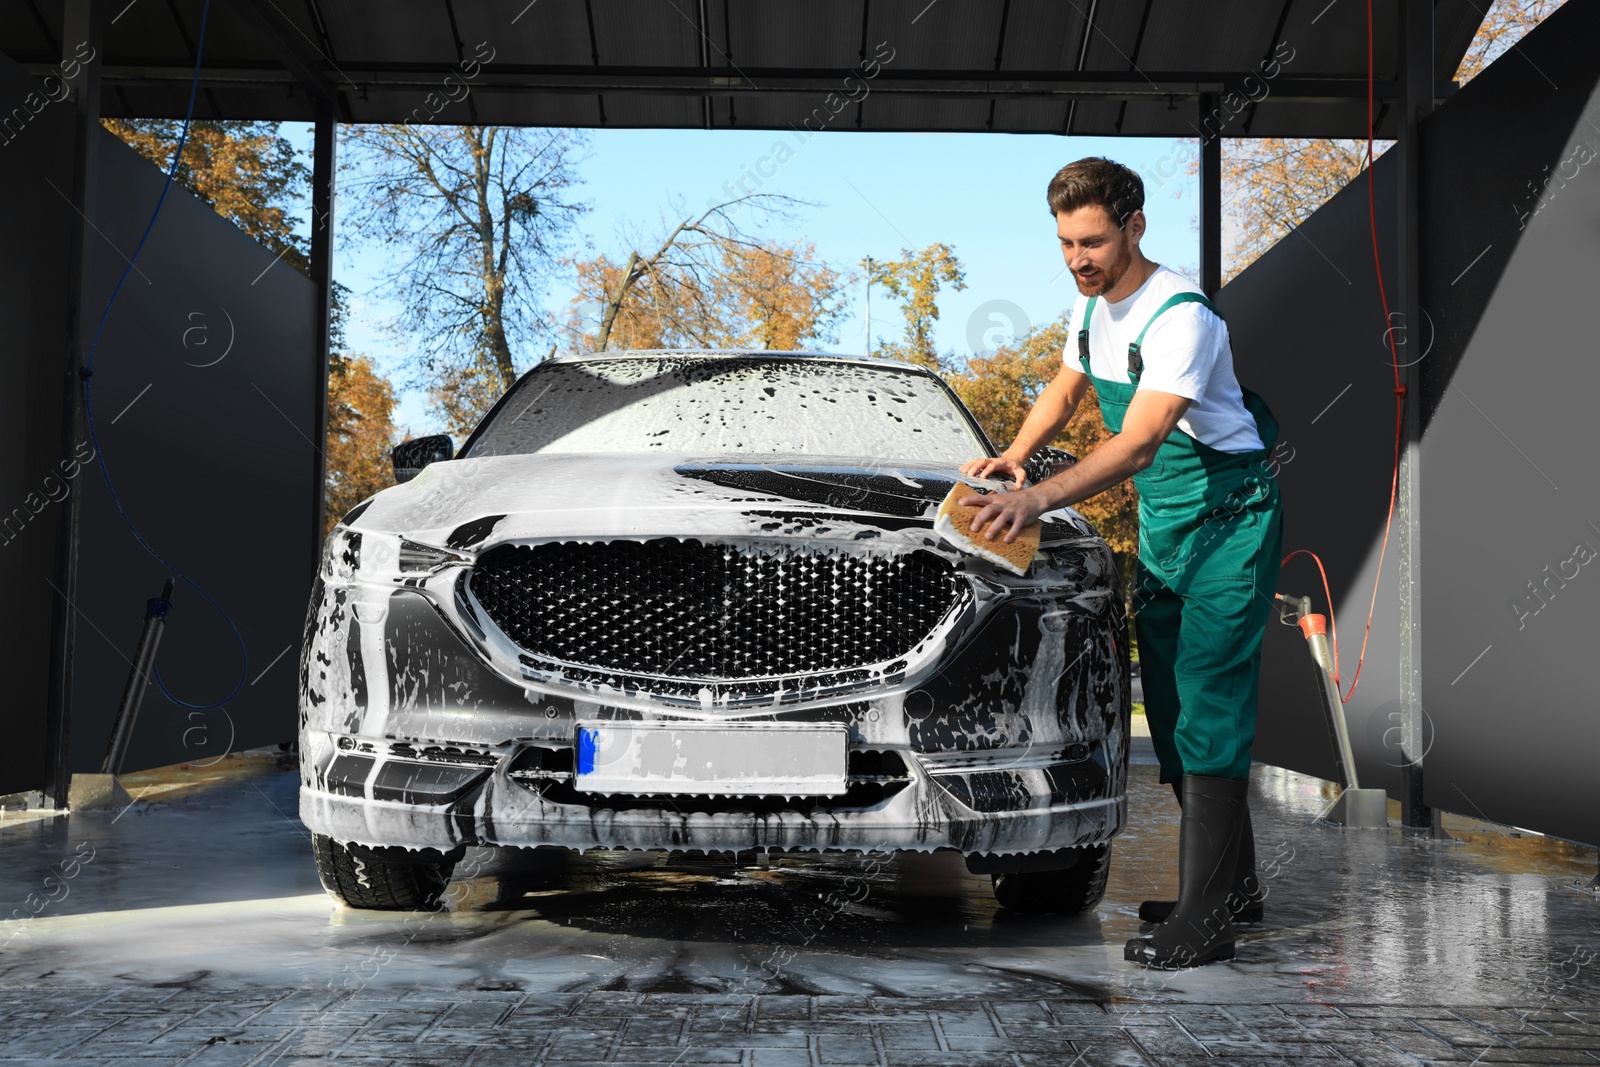 Photo of Worker washing auto with sponge at outdoor car wash